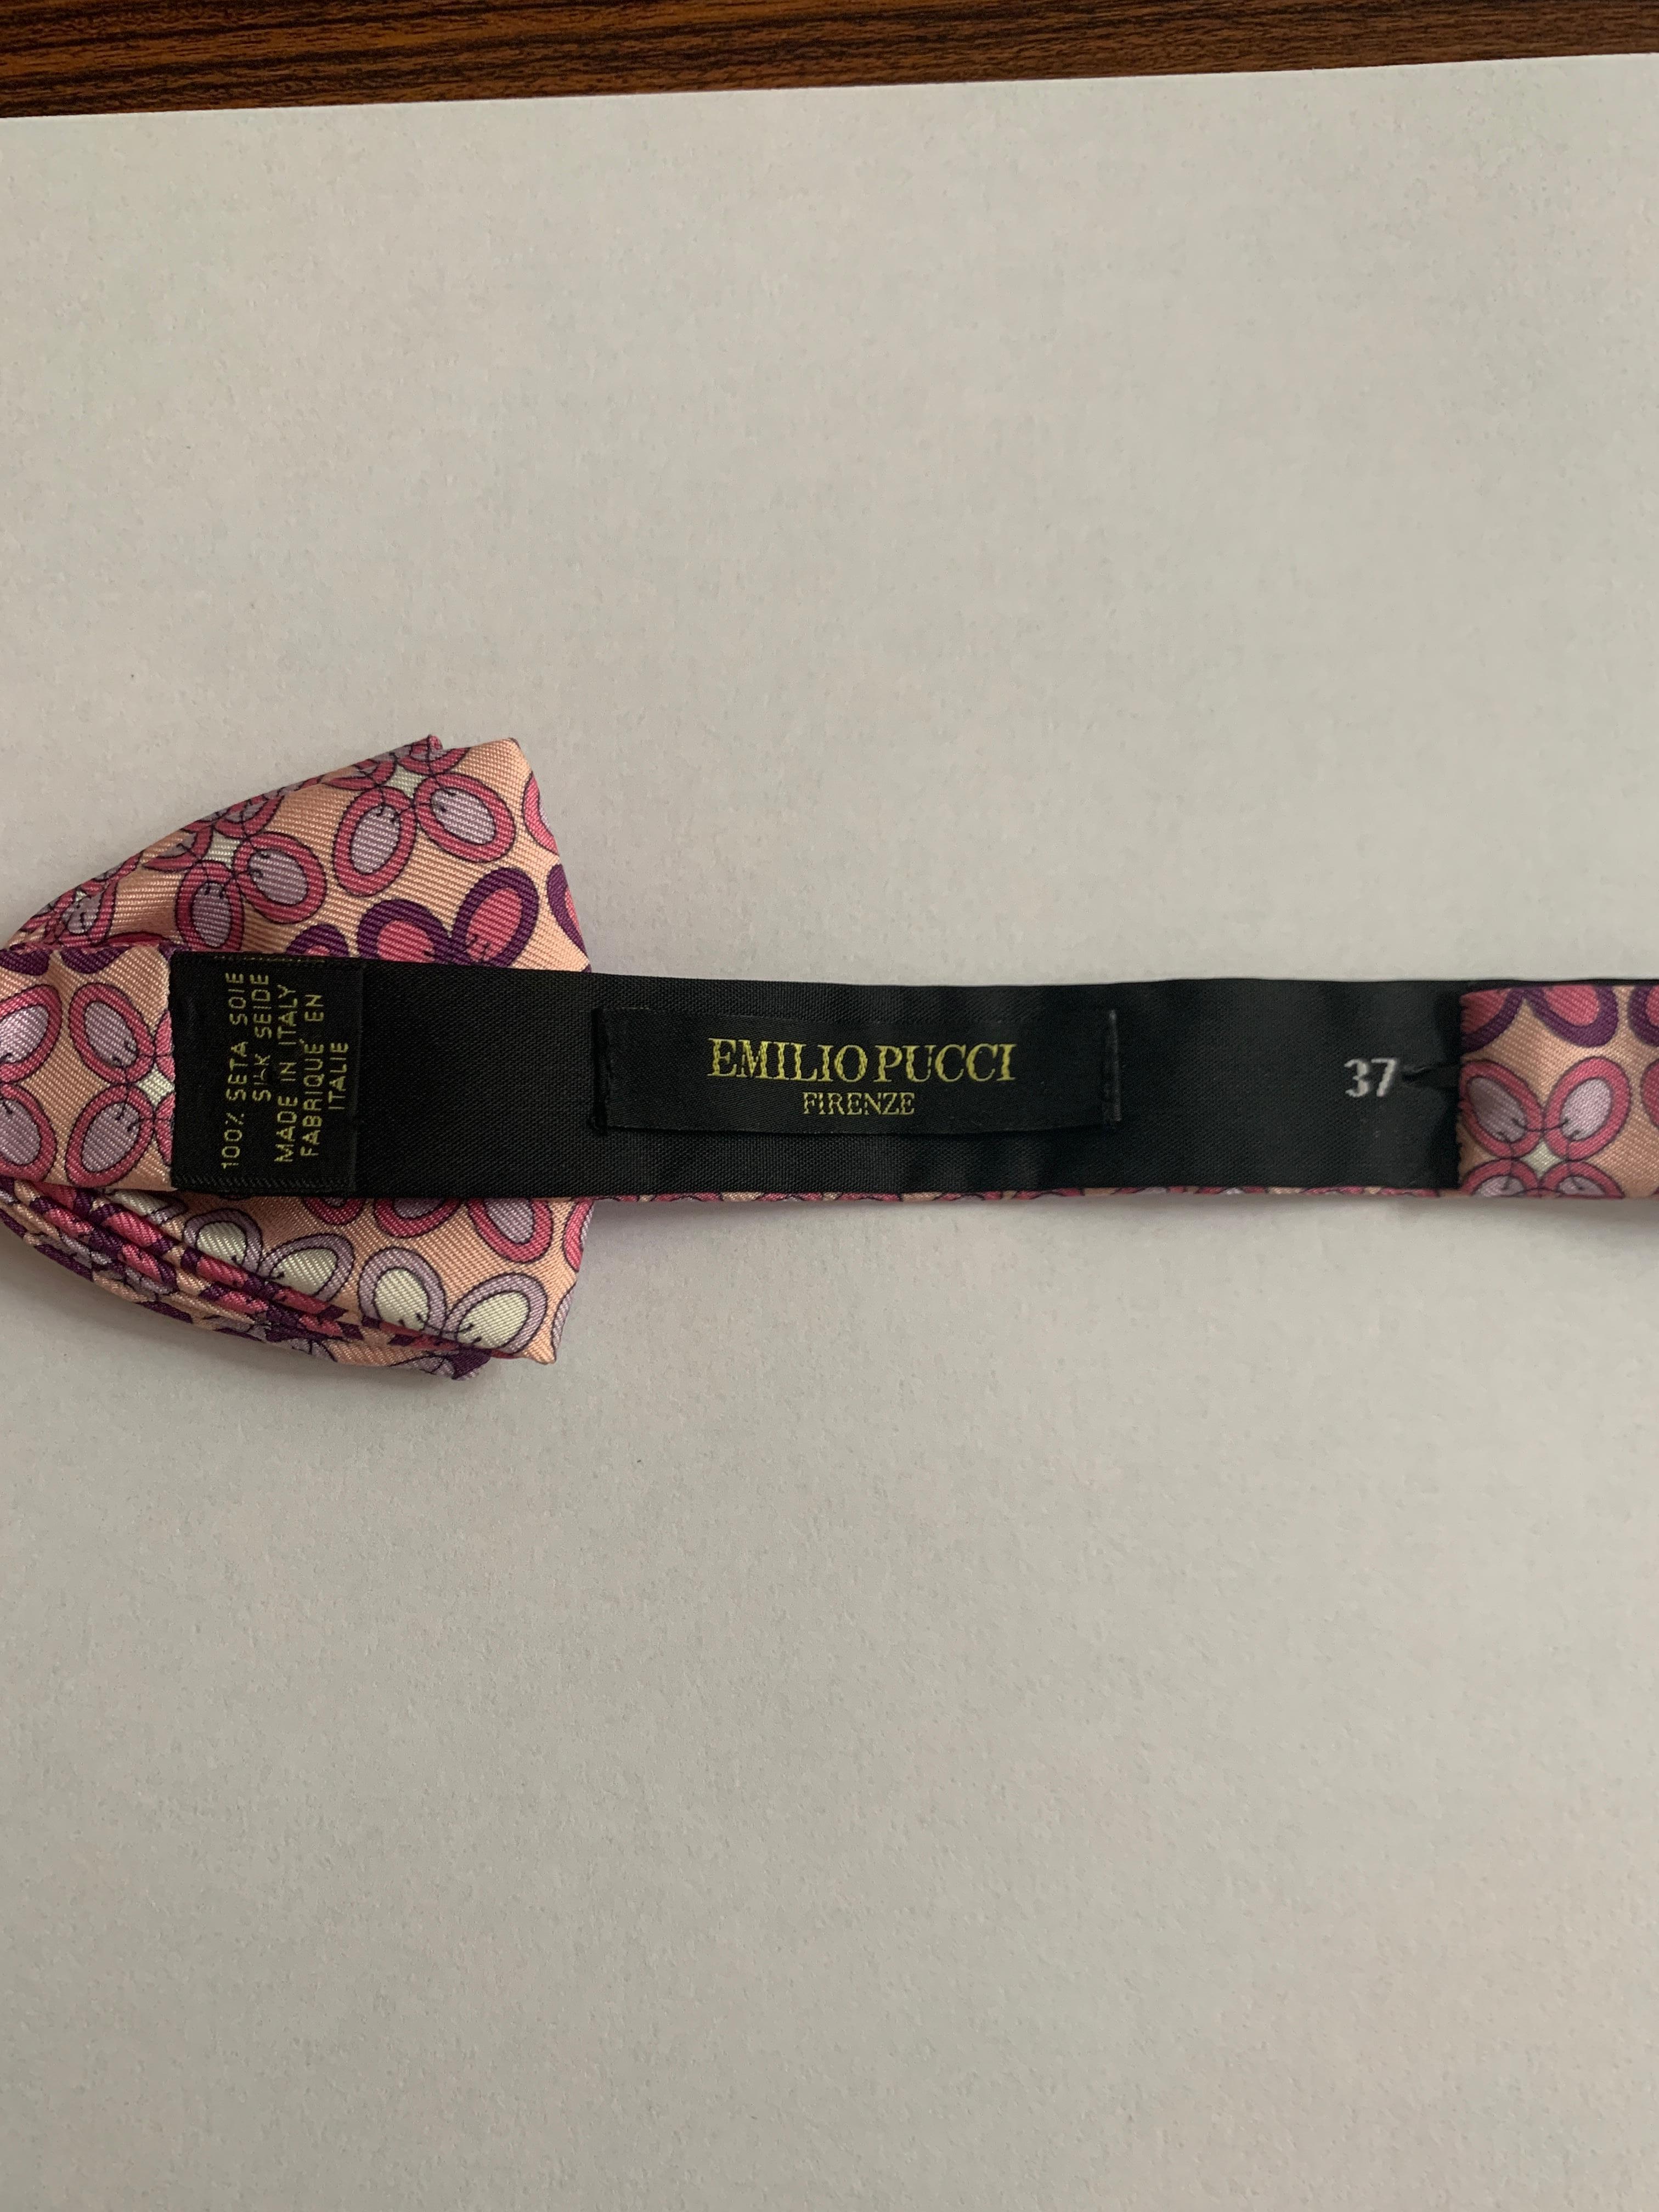 Brown Emilio Pucci Pink and Purple Print Bow Tie Pre-Tied Adjustable